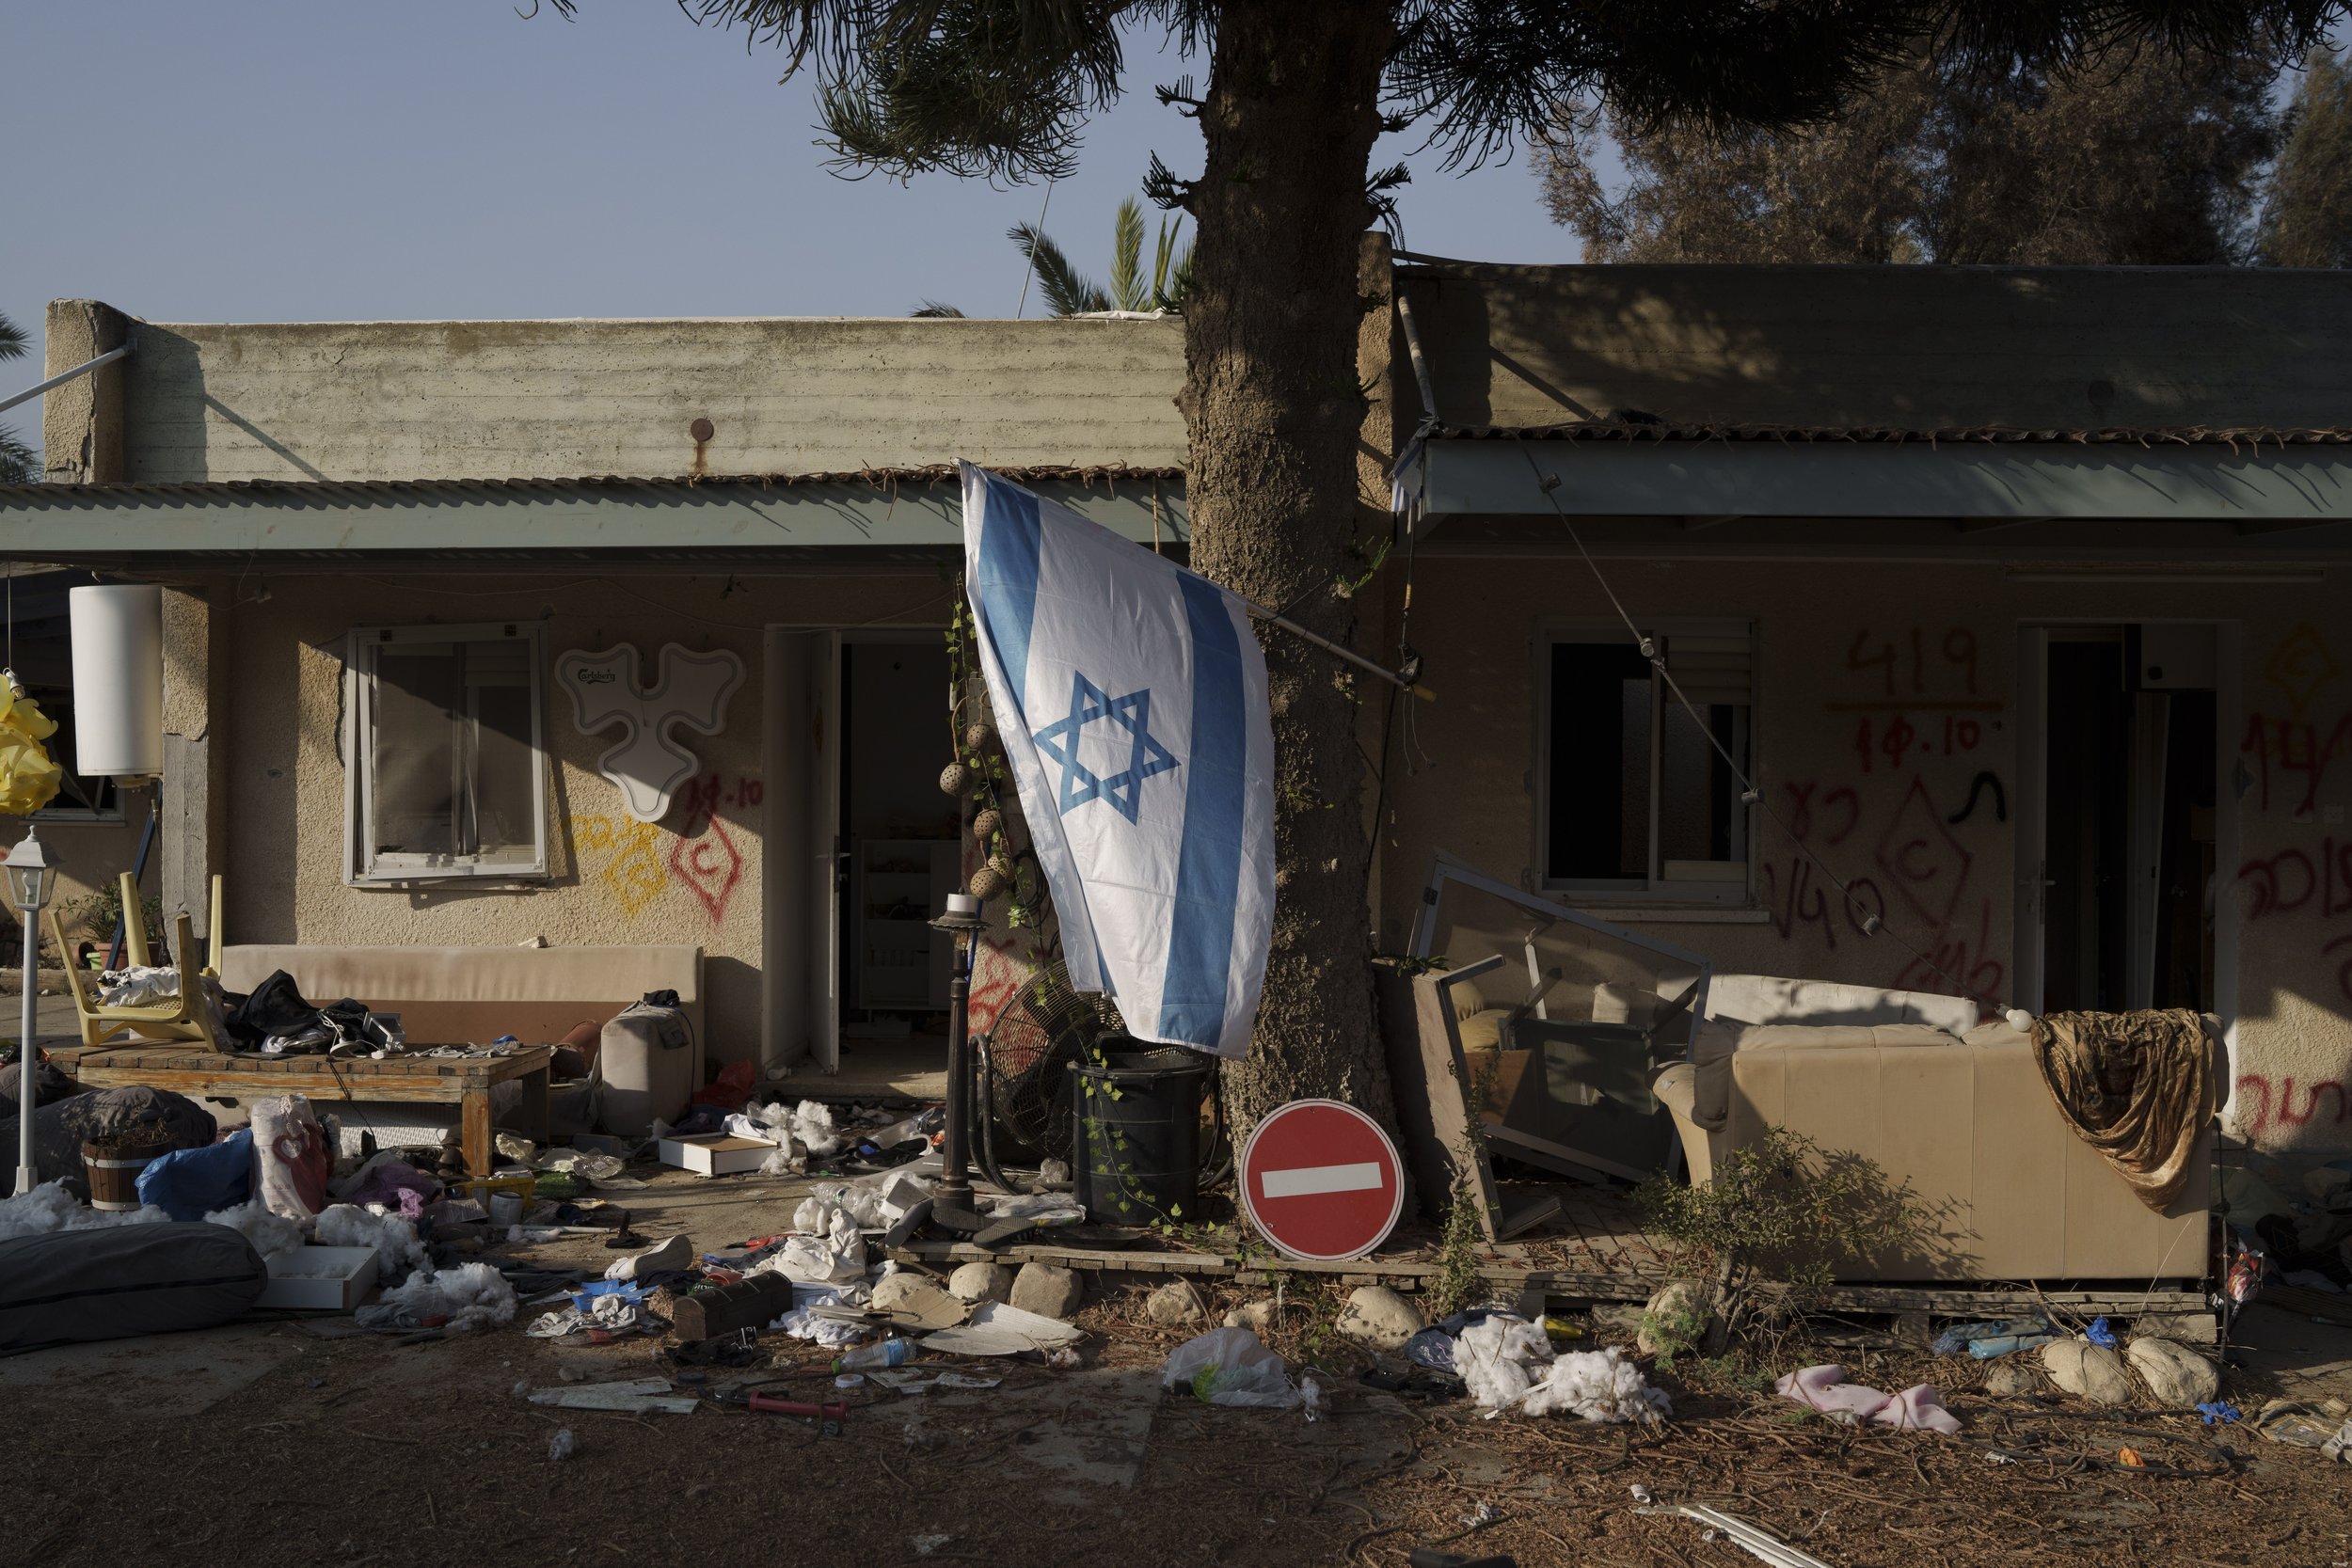  An Israeli flag hangs between destroyed homes in kibbutz Kfar Azza, Israel, near the Gaza Strip, on Nov. 13, 2023. The kibbutz was attacked during the Hamas cross-border attack on Oct. 7, killing and capturing members of its community. (AP Photo/Leo